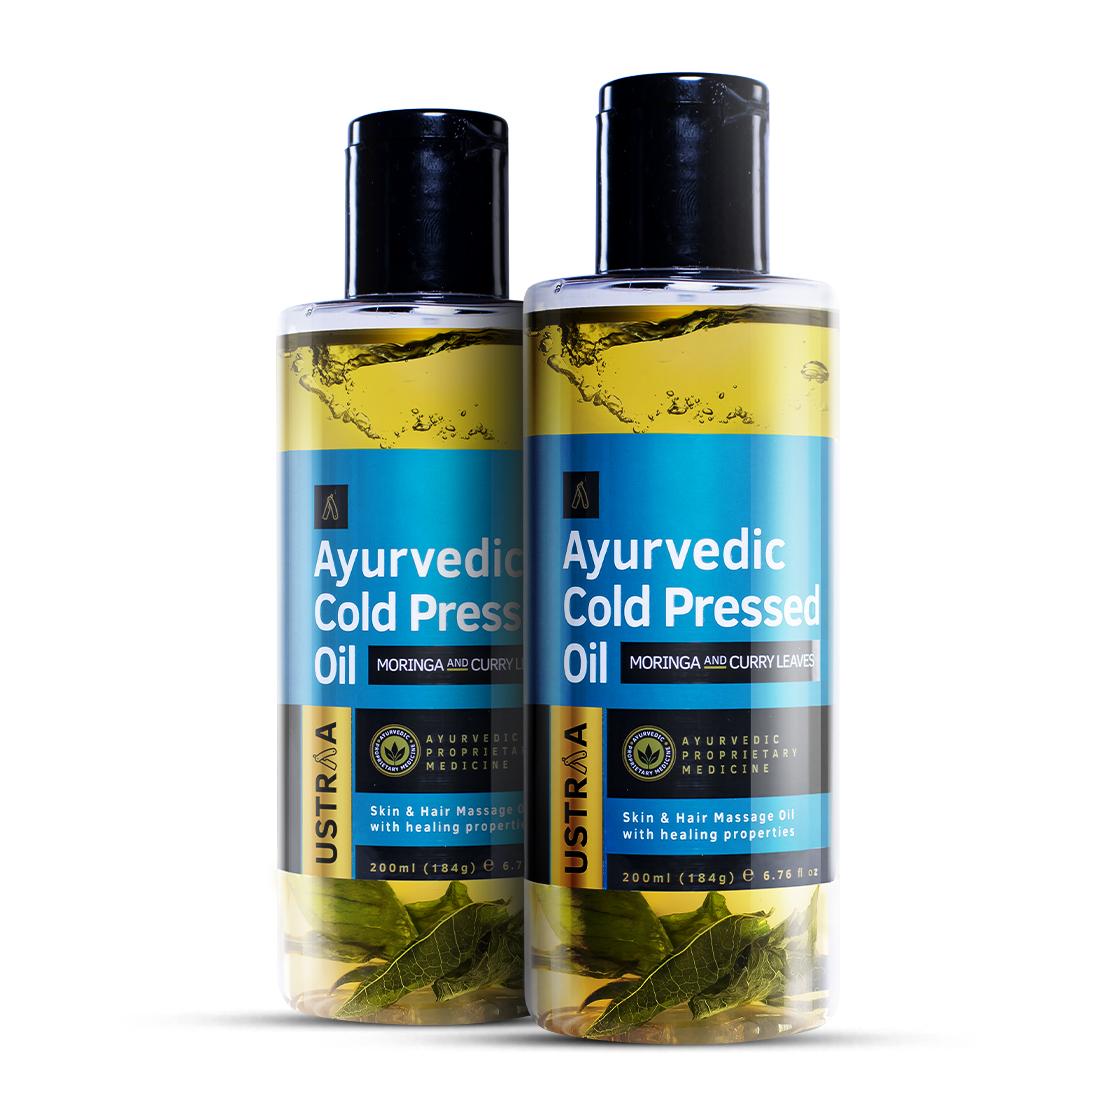 Ustraa Ayurvedic Cold Pressed Oil with Moringa Oil & Curry Leaves - set of 2